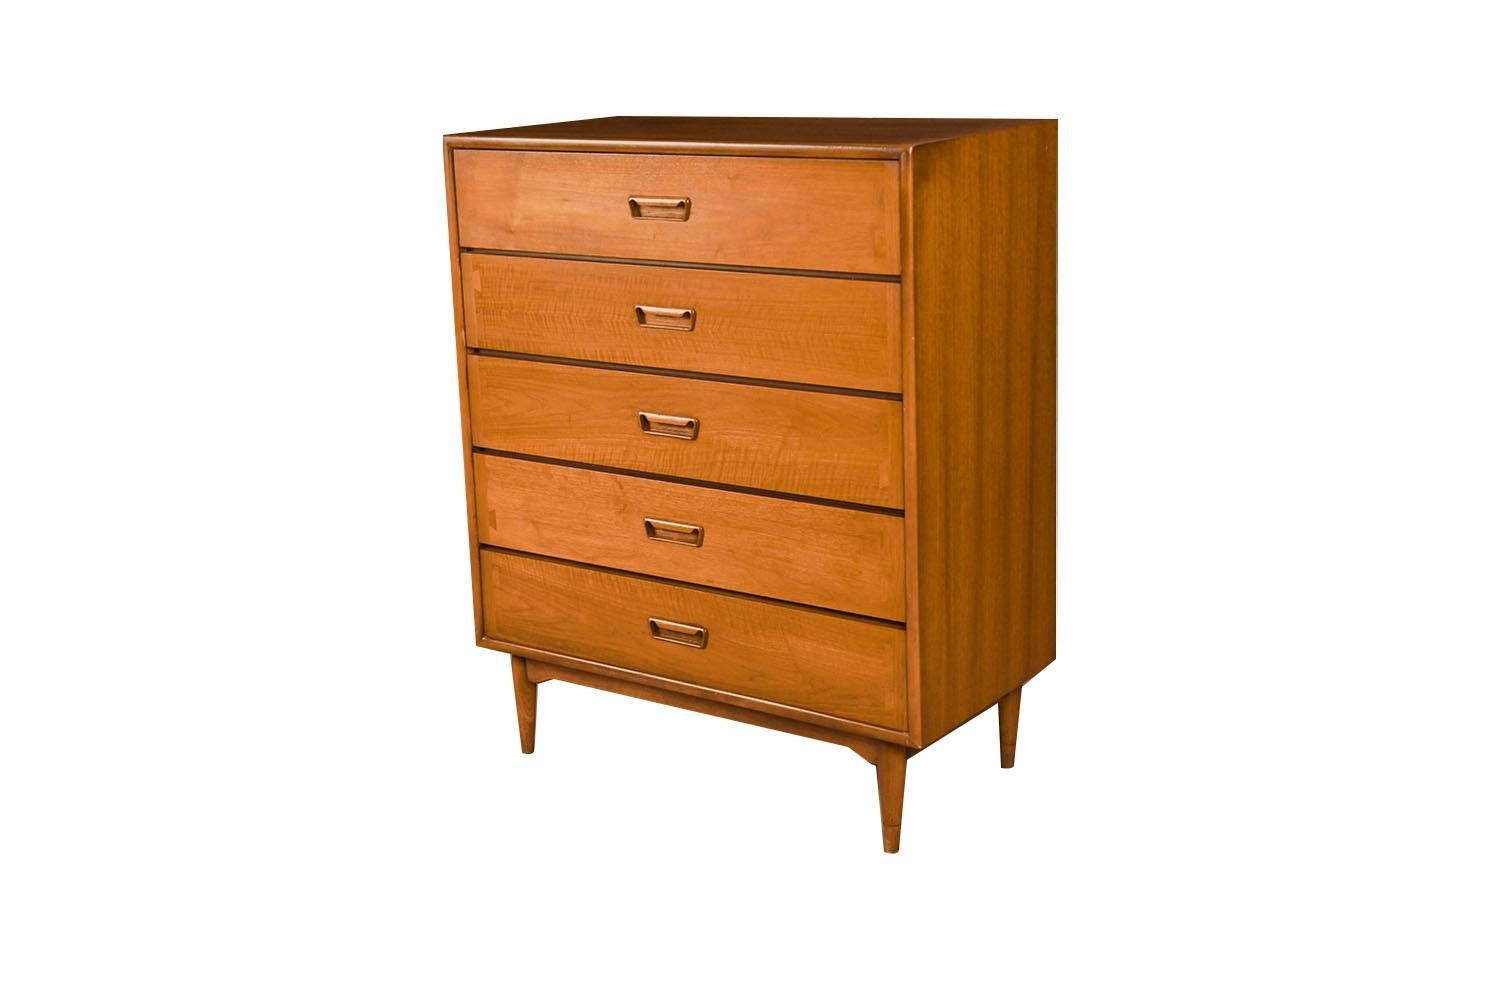 An elegant Mid-Century Modern Lane Acclaim tall Dresser c. 1960s. This is a beautiful example of Mid-Century craftsmanship by Lane Furniture. This beautiful dresser is a difficult to find style. An extremely well made and solid piece in great